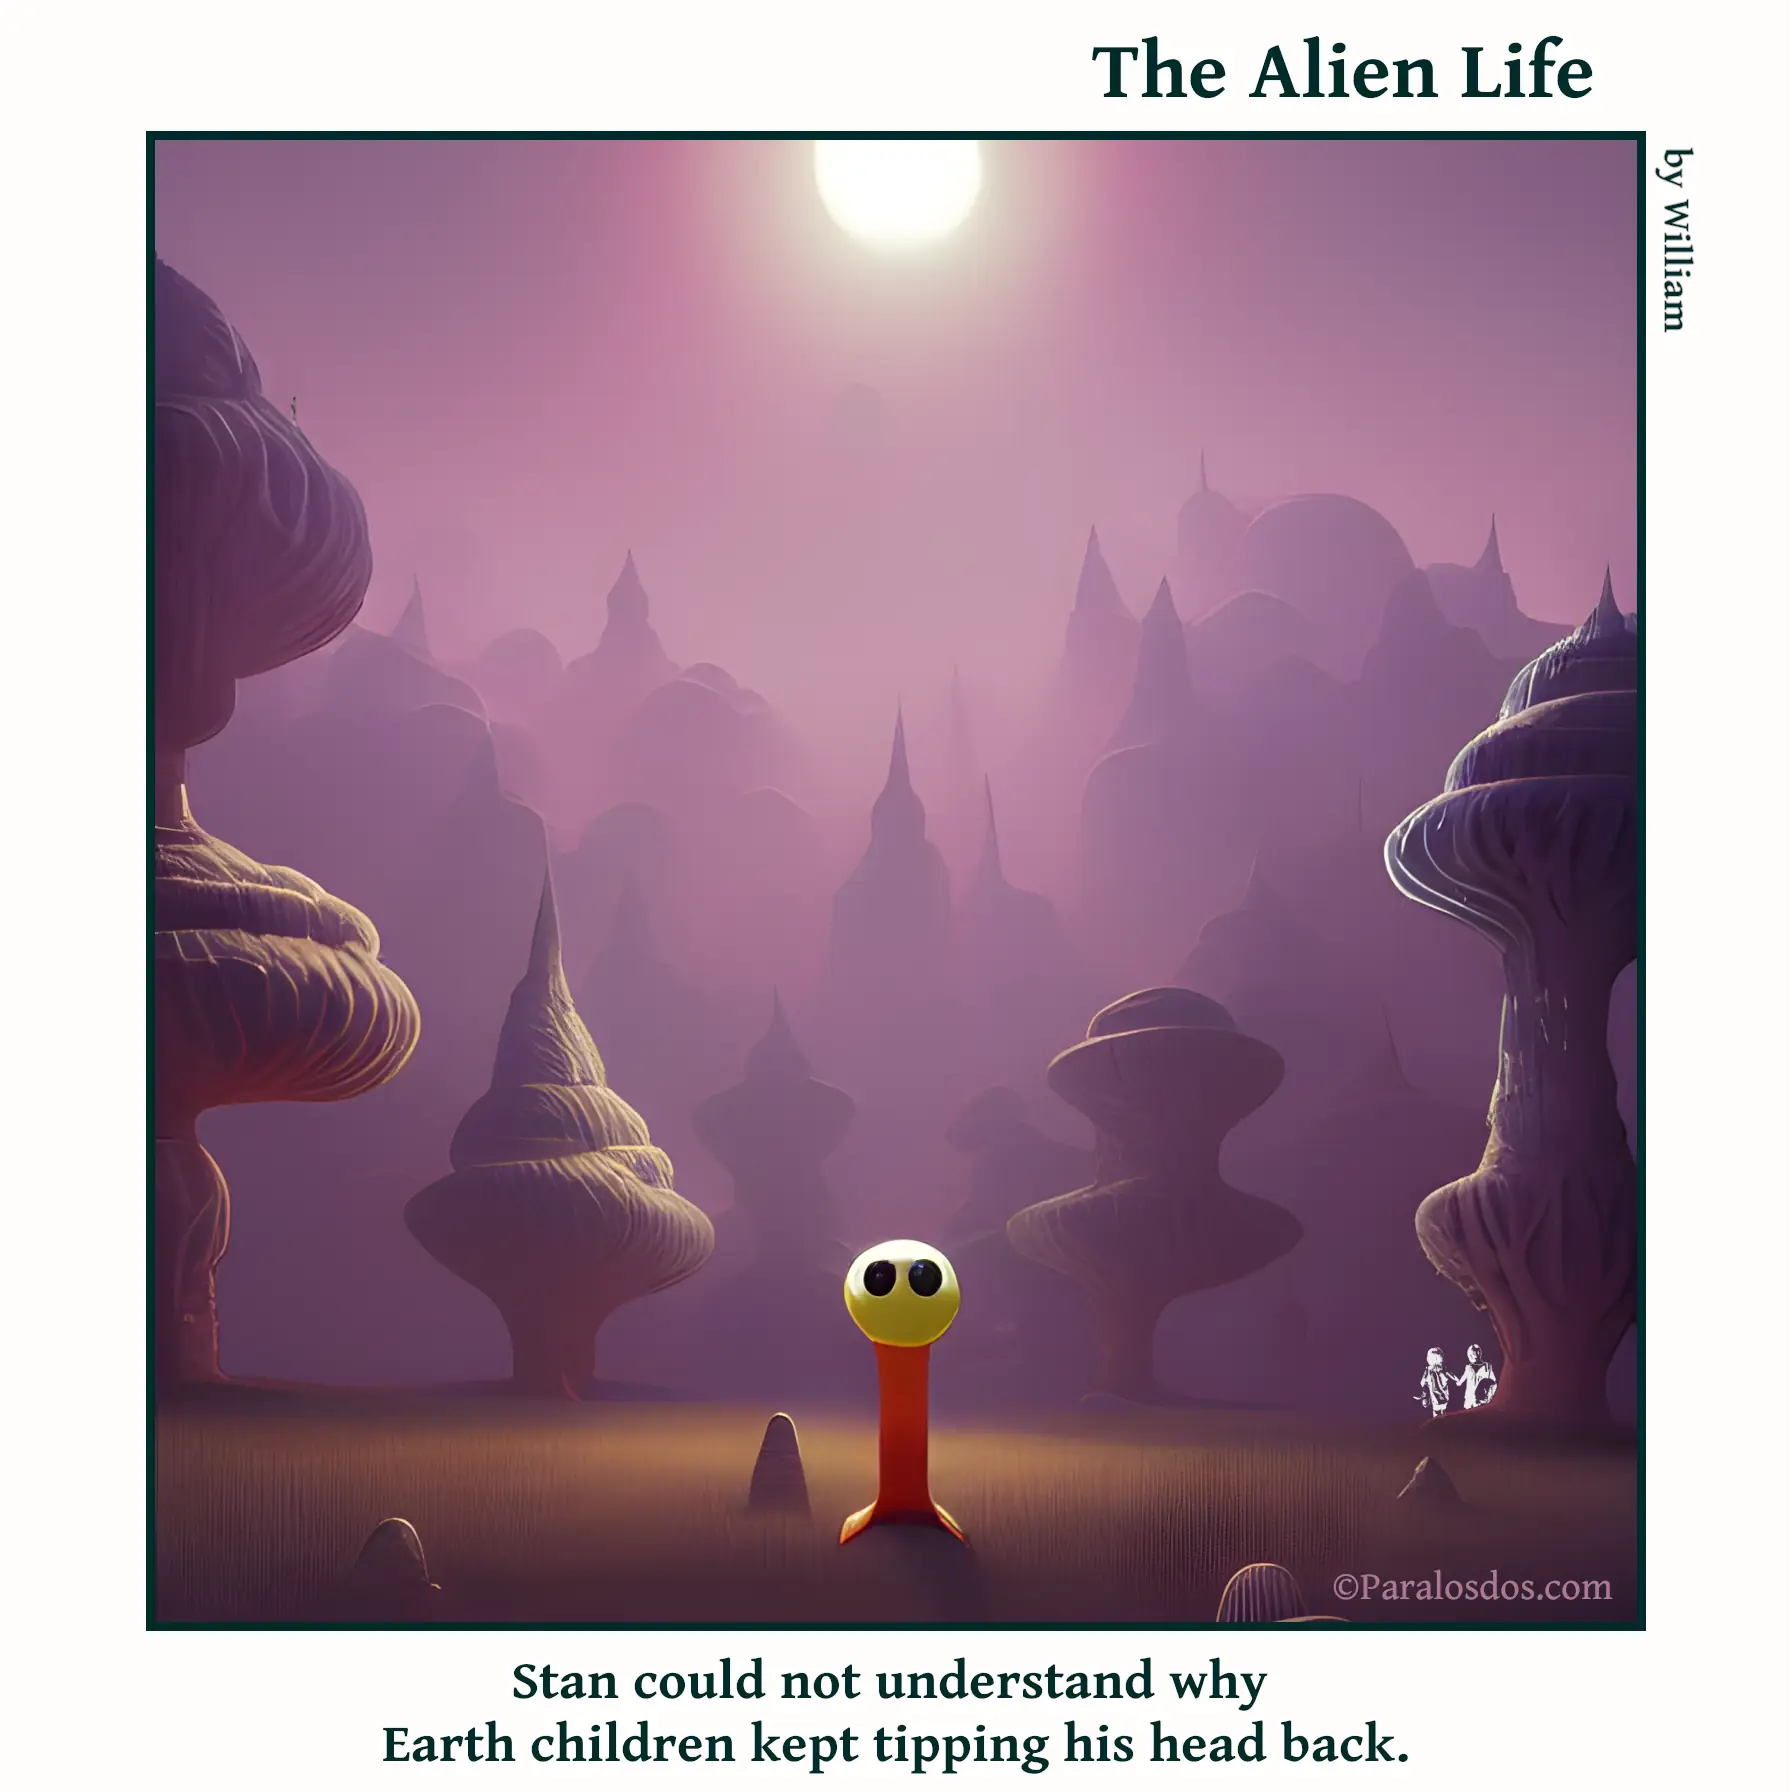 The Alien Life, one panel Comic. An alien that looks like a pez dispenser is standing in a field. The caption reads: Stan could not understand why Earth children kept tipping his head back.